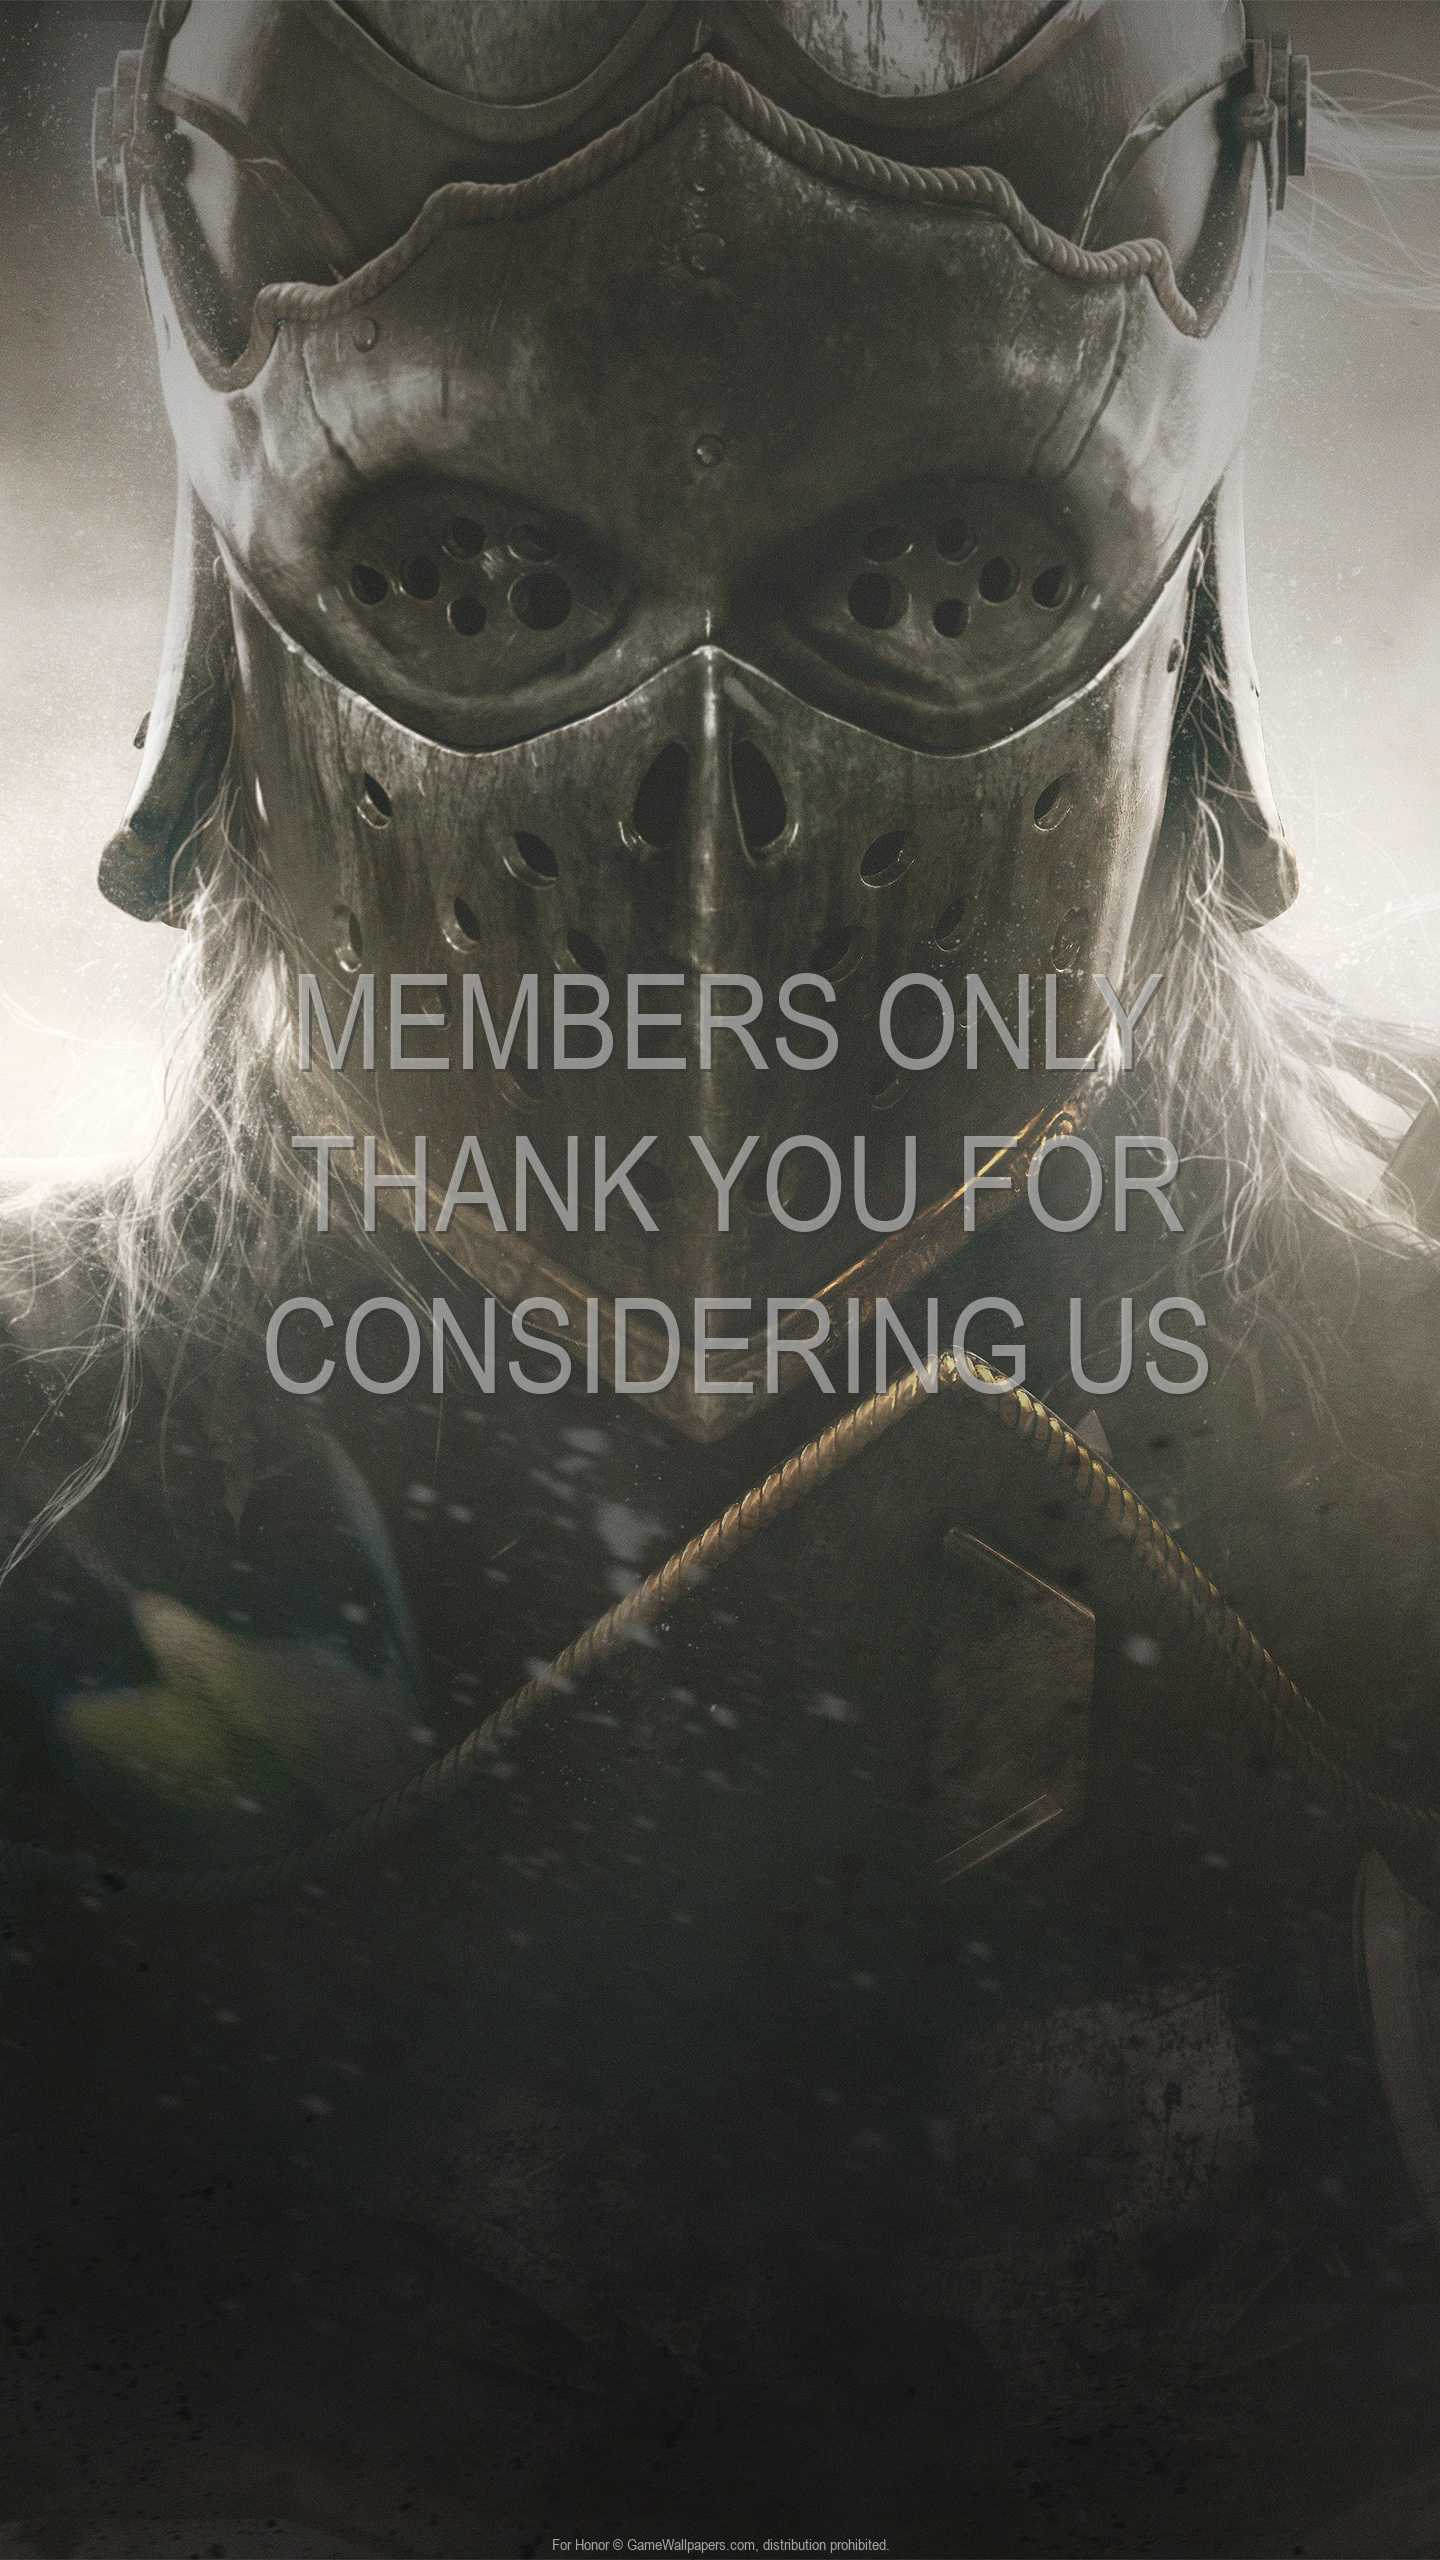 For Honor 1440p Vertical Mobile wallpaper or background 06